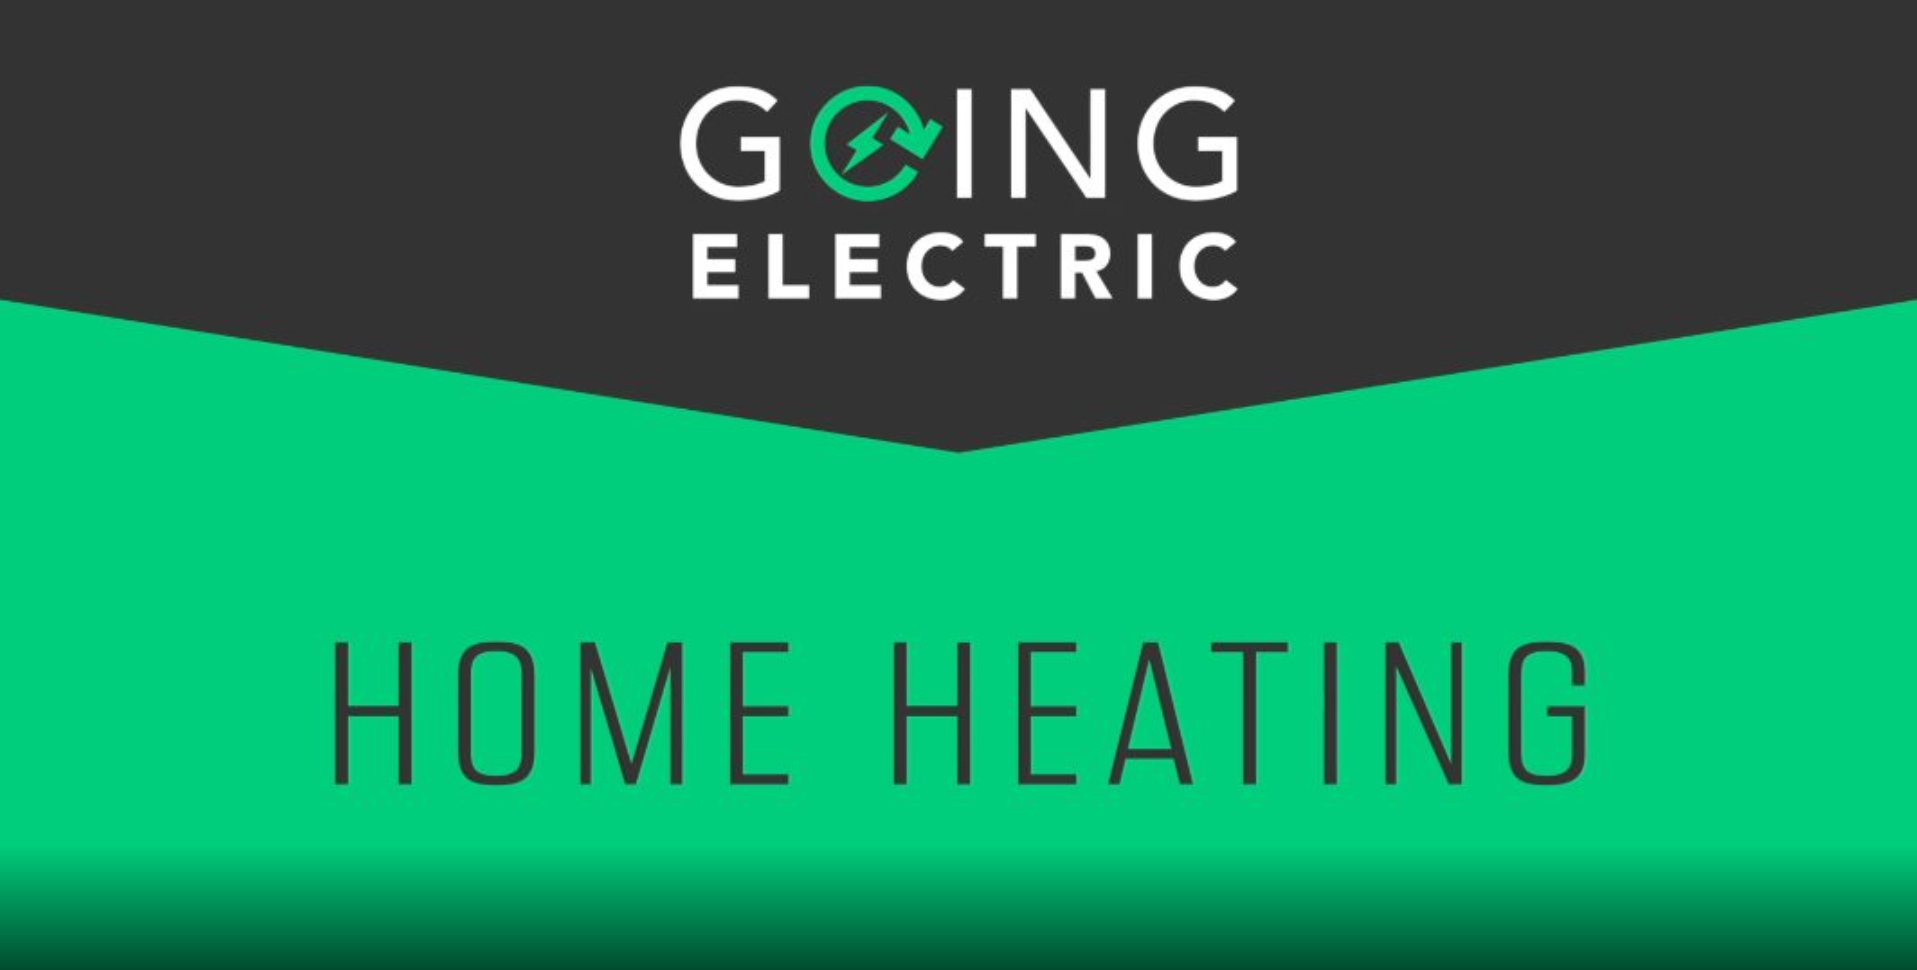 Going Electric at Home: Home Heating